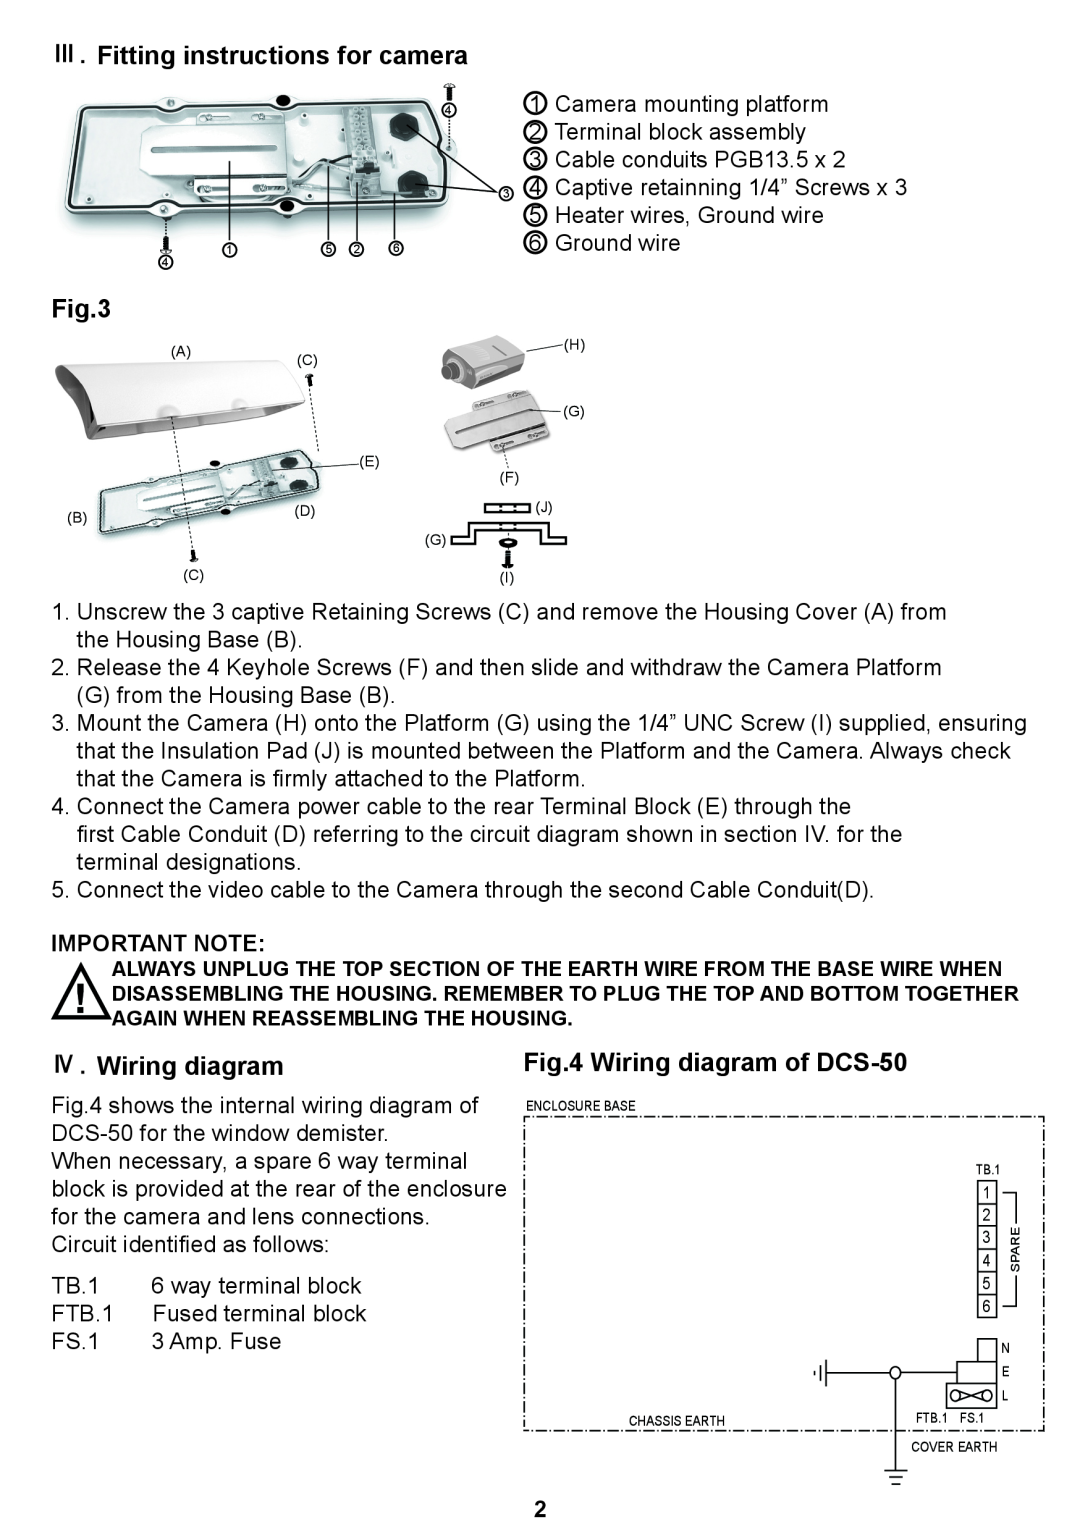 D-Link user manual Ⅲ.Fitting instructions for camera, Ⅳ.Wiring diagram, Wiring diagram of DCS-50, Important Note 